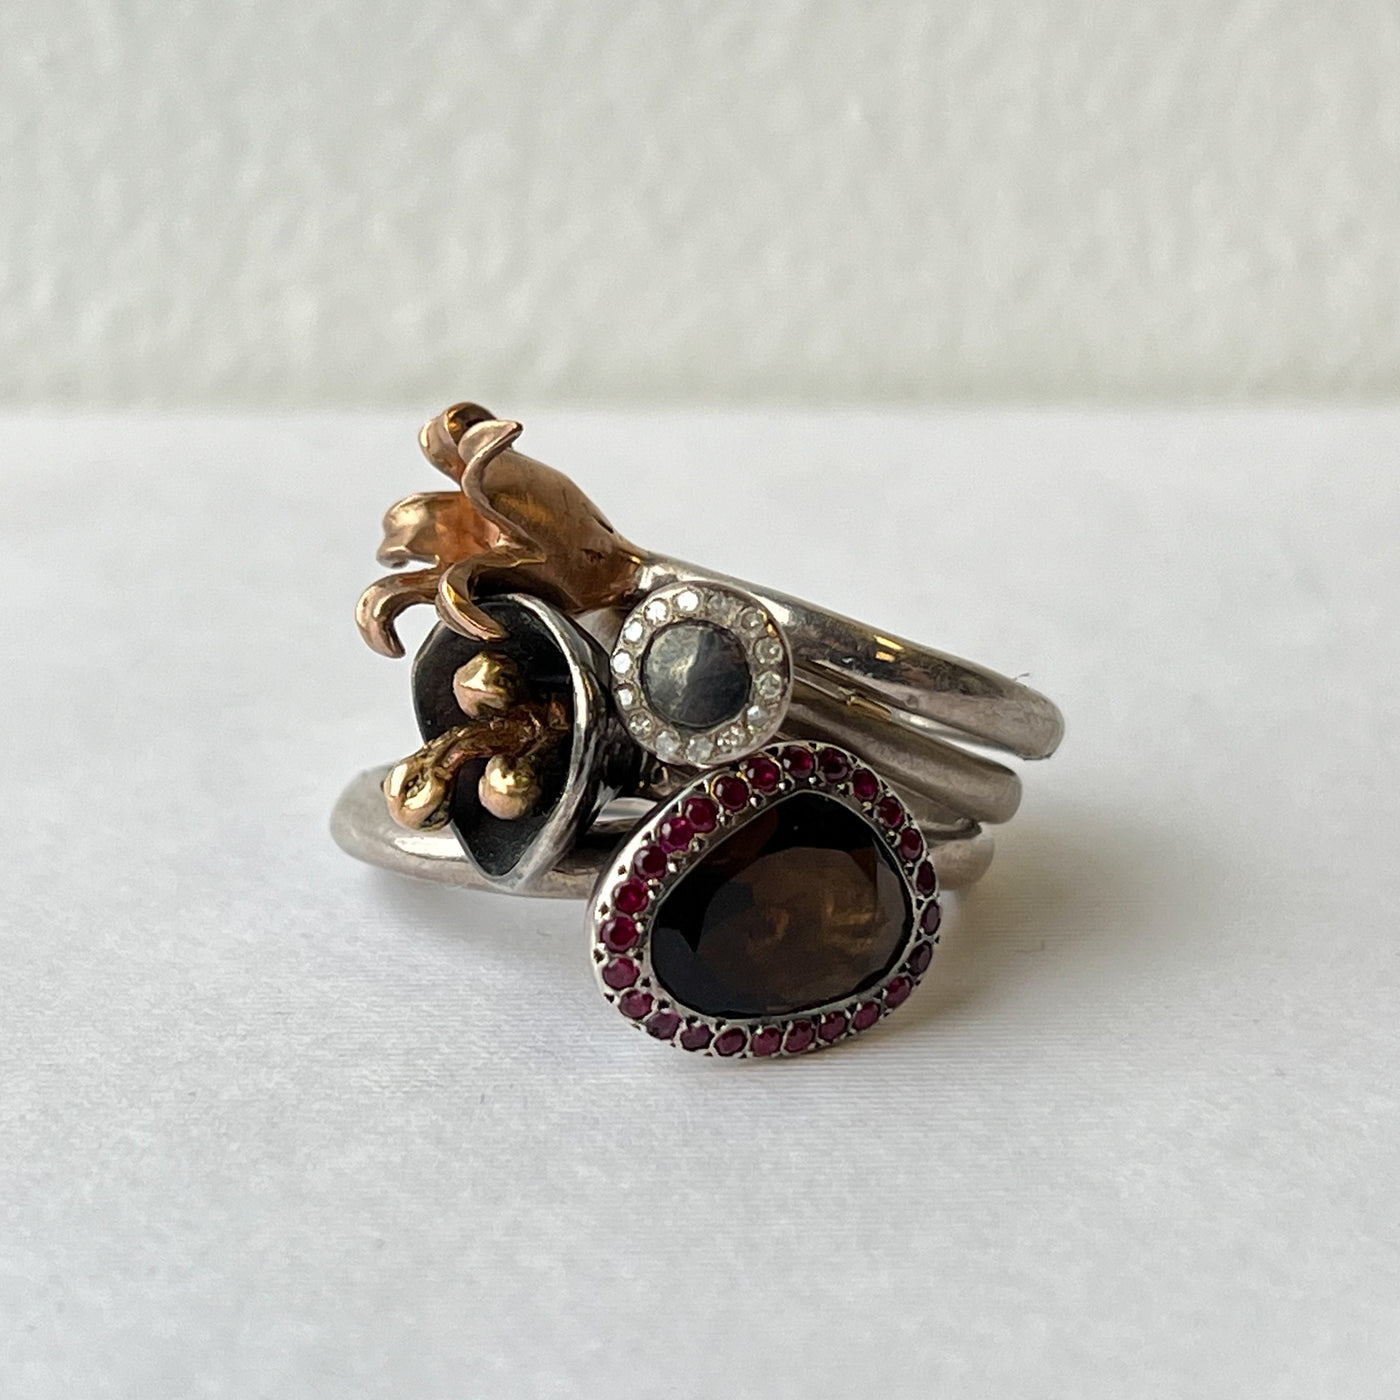 Rosa Maria Silver Ring with Valeria Flower - Discounts on Rosa Maria at UAL